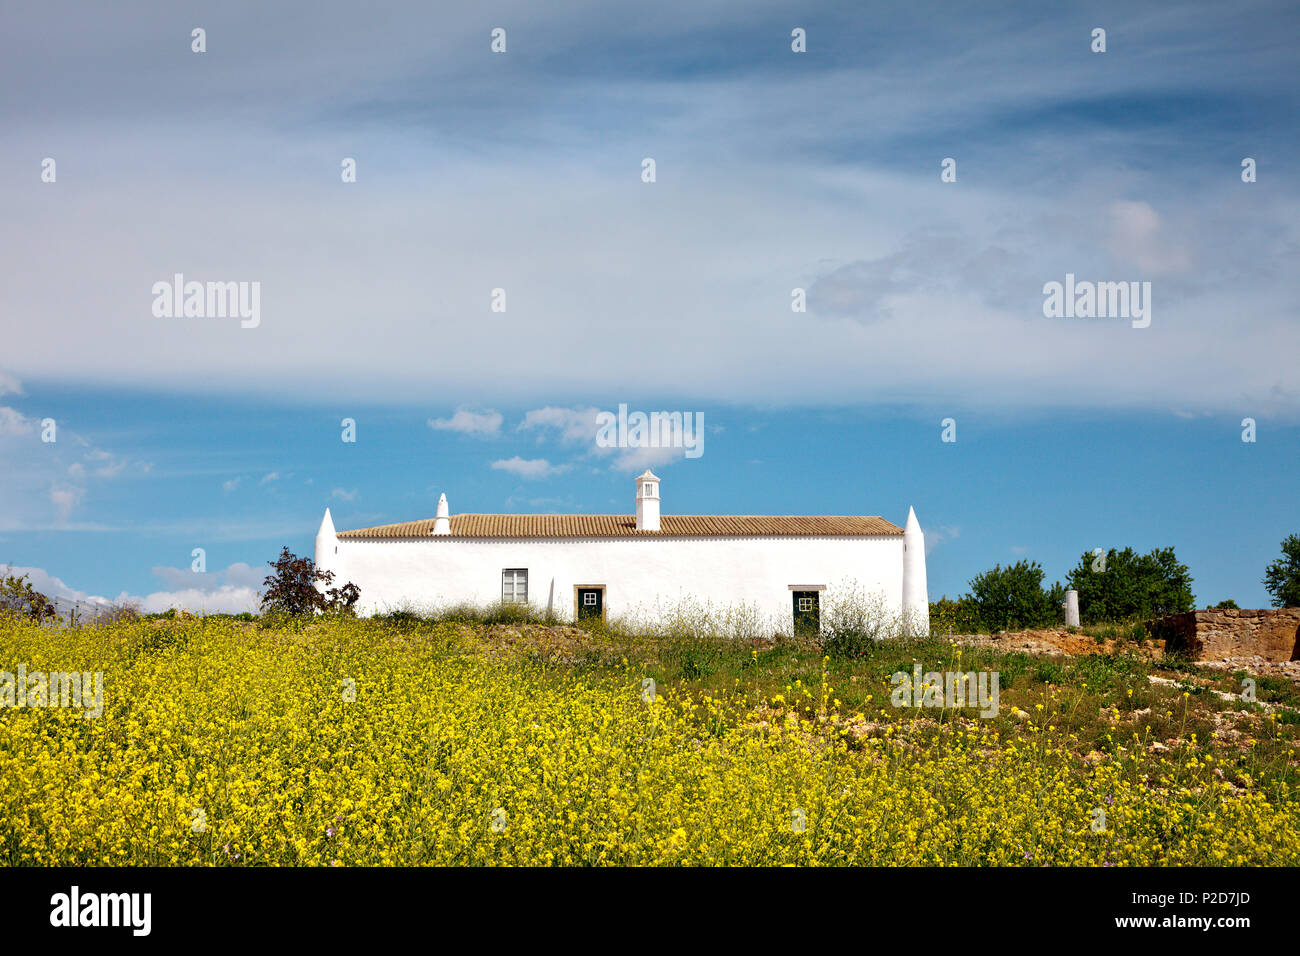 Flowers in front of a white house, Milreu, Algarve, Portugal Stock Photo